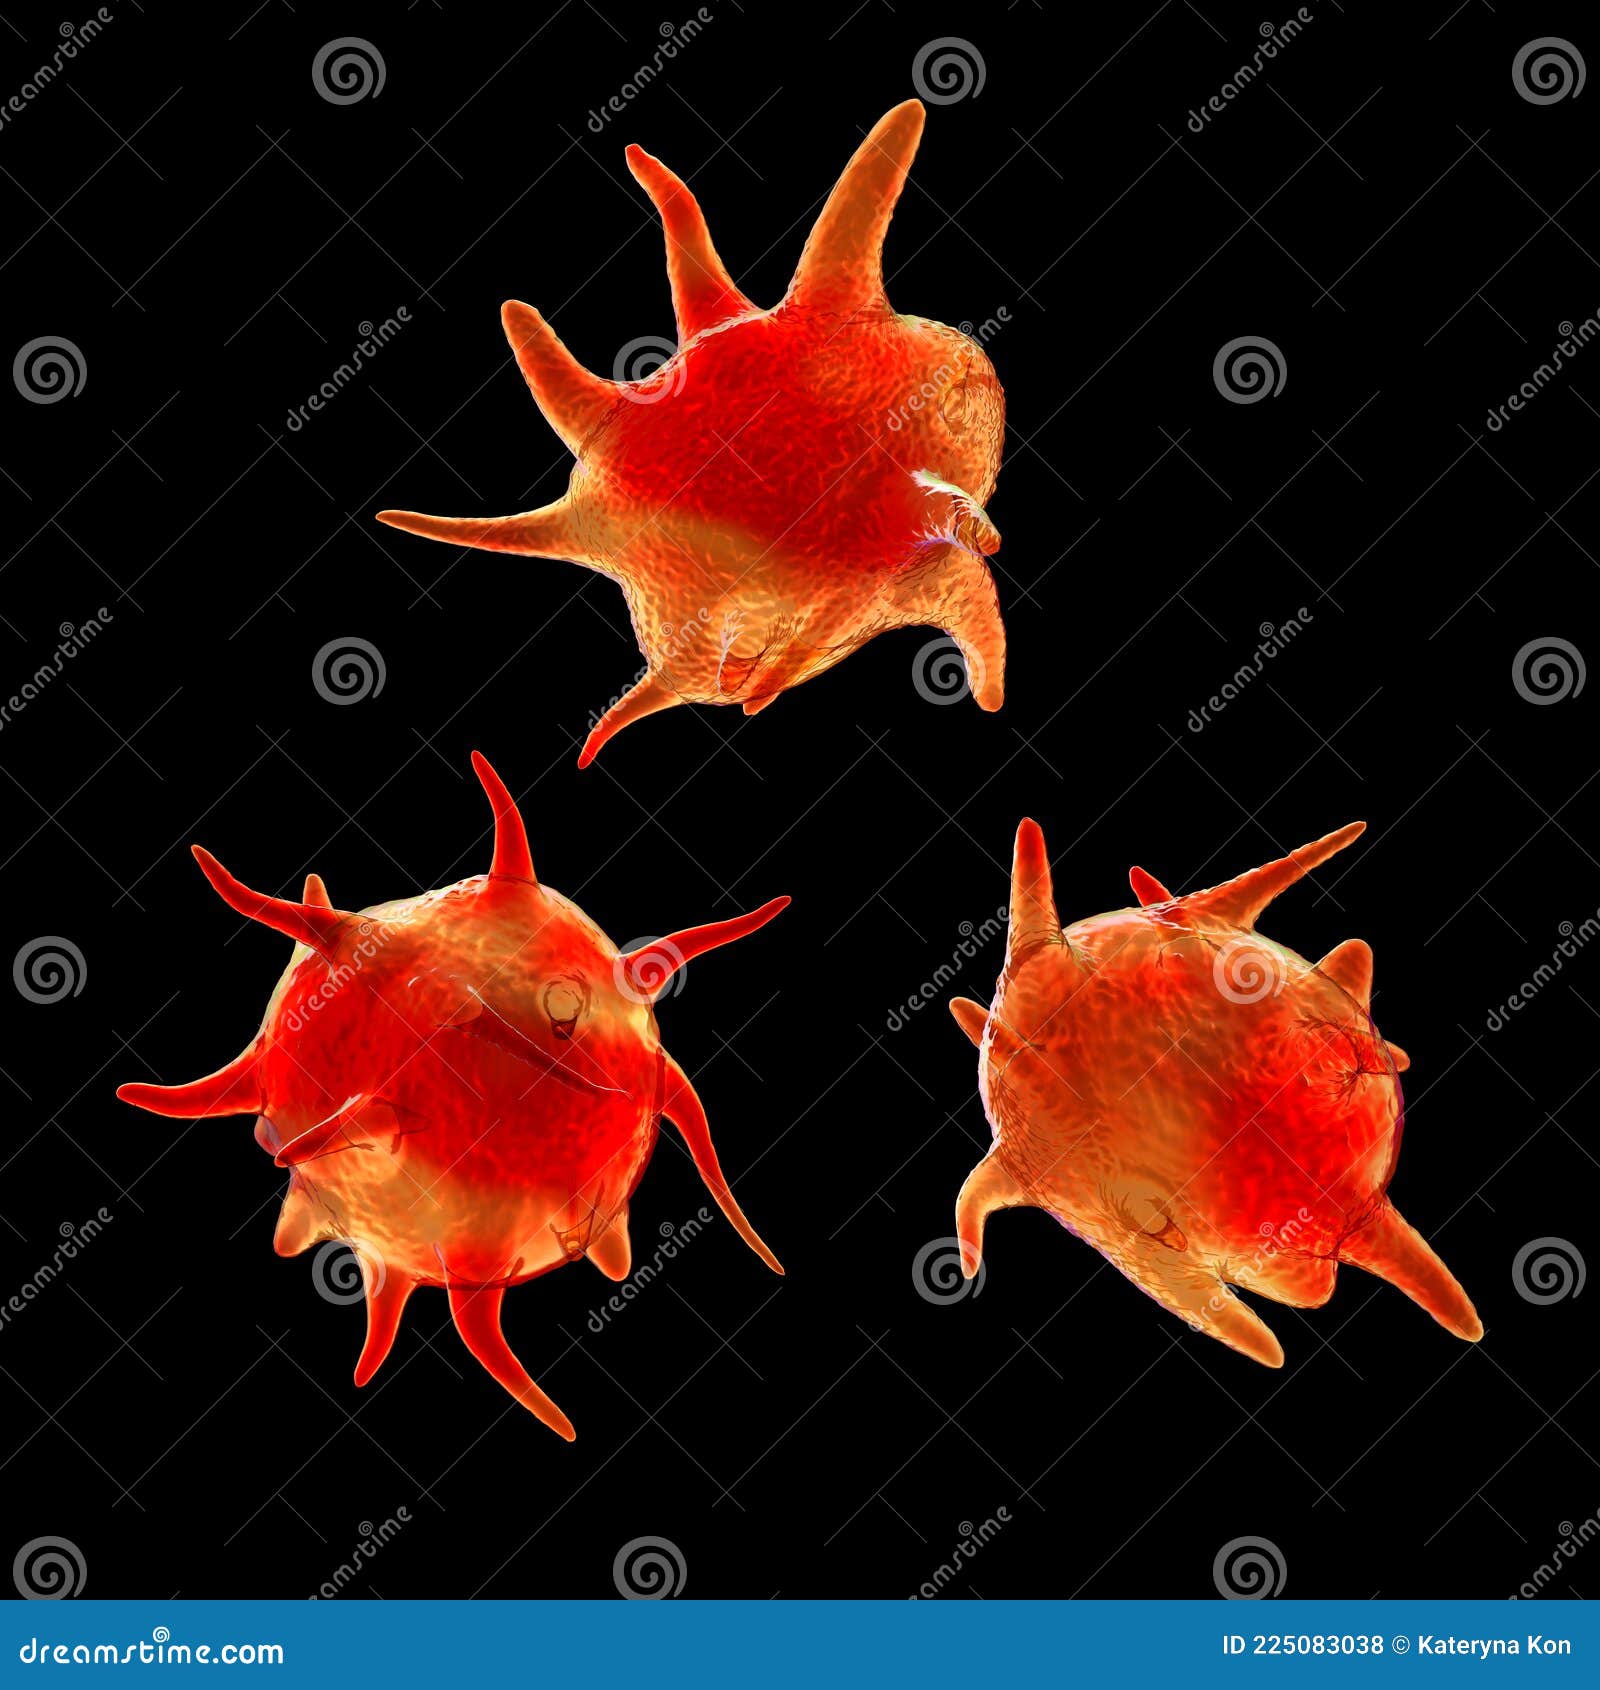 Activated Platelets Also Known As Thrombocytes Blood Cells